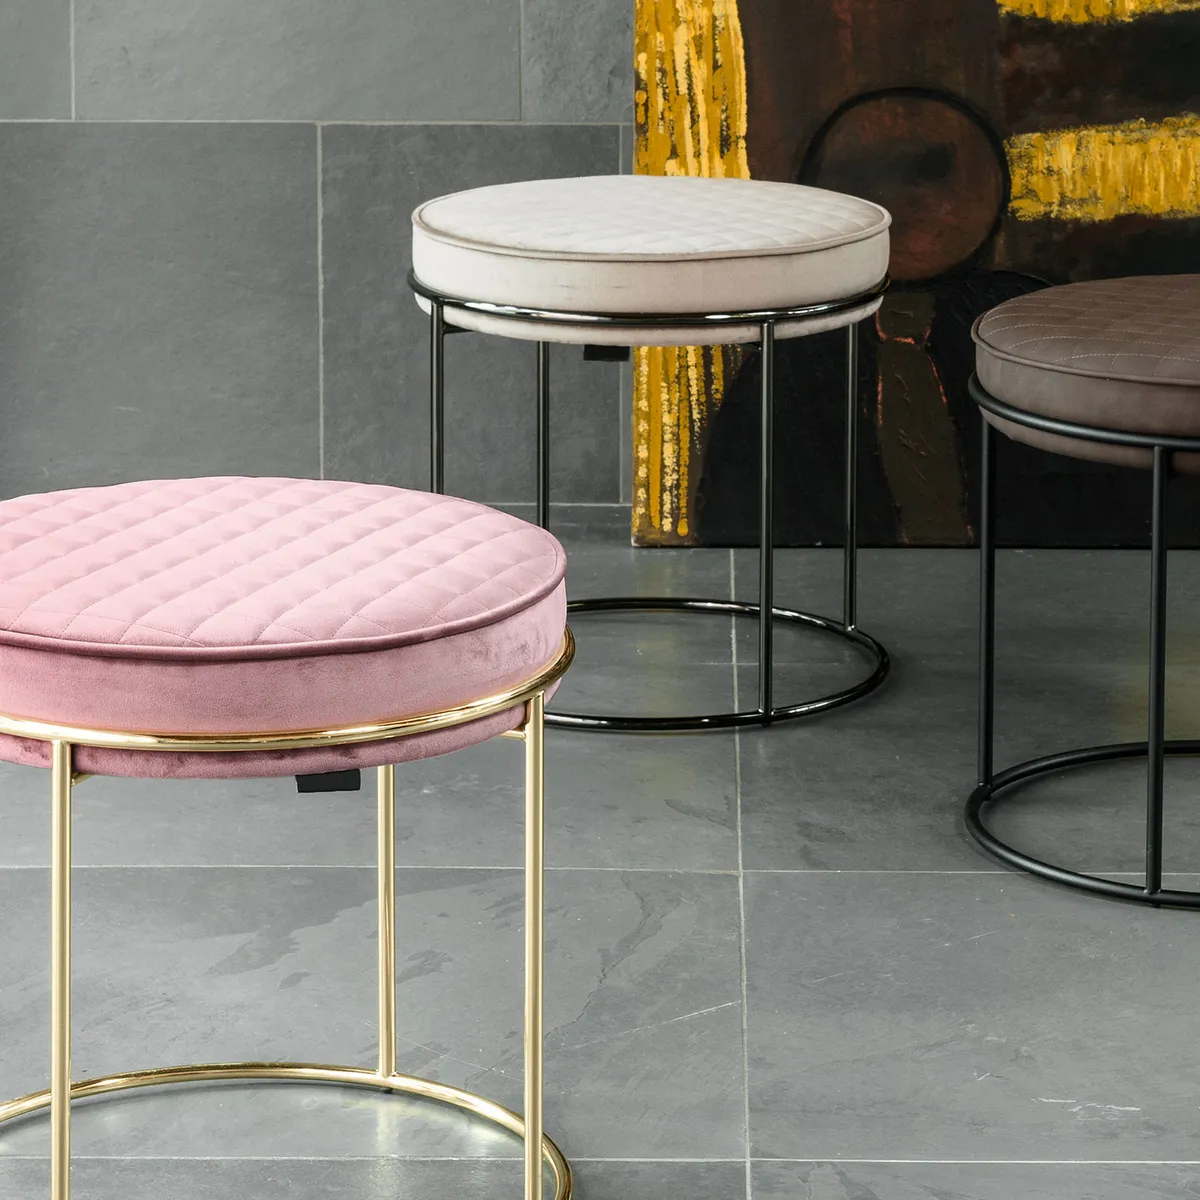 Atollo Low Stool Velvet Brass Inside Out Contracts